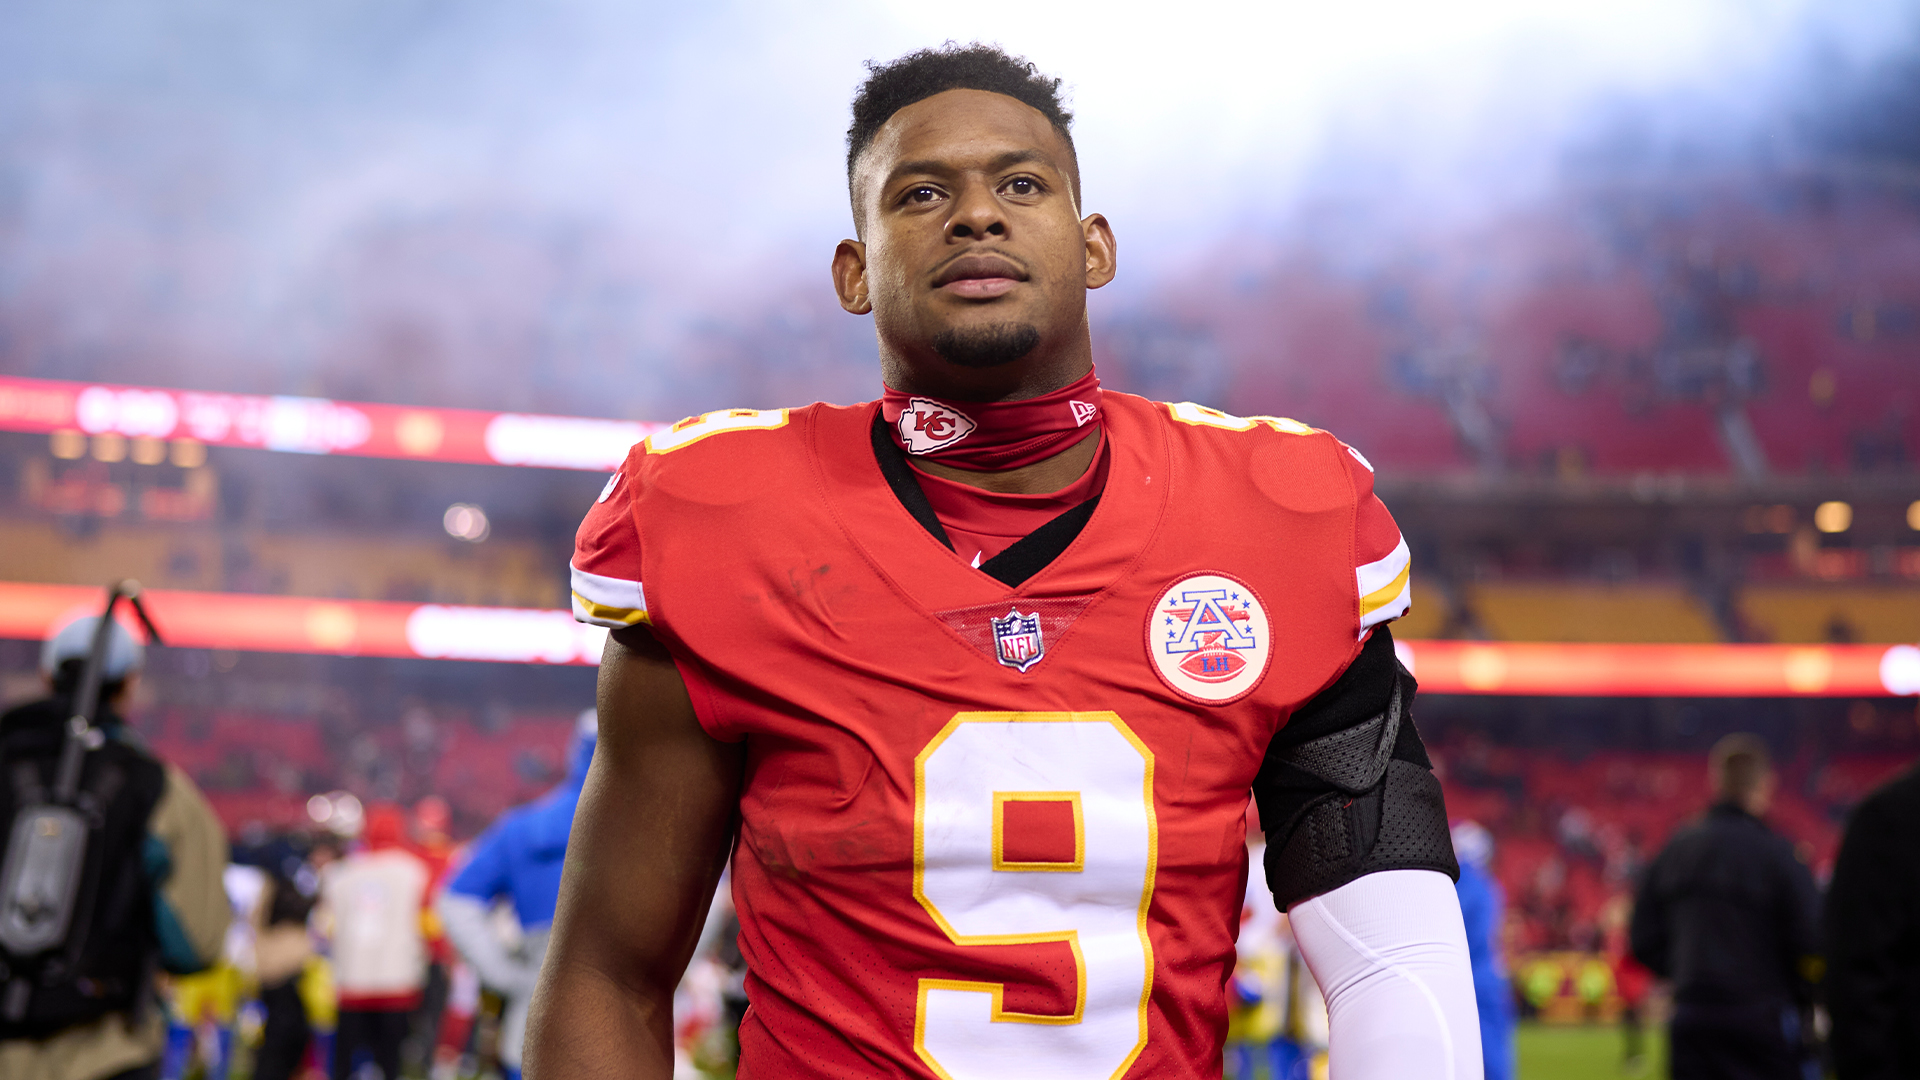 Kansas City Chiefs' JuJu Smith-Schuster Doubles His Salary With $1M Bonus For Super Bowl Win